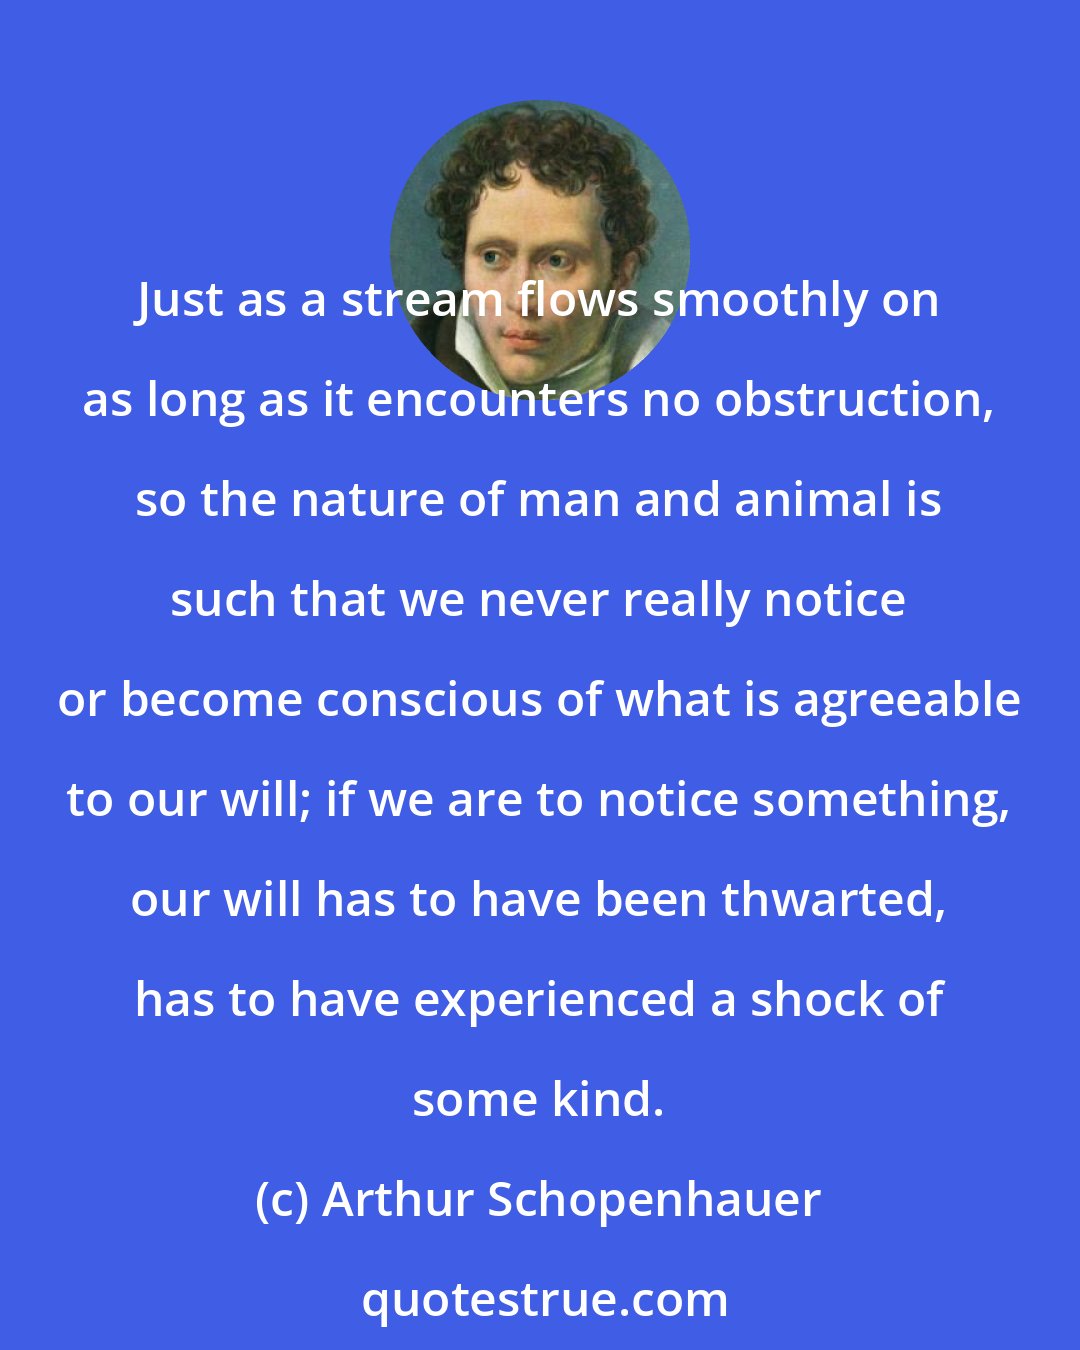 Arthur Schopenhauer: Just as a stream flows smoothly on as long as it encounters no obstruction, so the nature of man and animal is such that we never really notice or become conscious of what is agreeable to our will; if we are to notice something, our will has to have been thwarted, has to have experienced a shock of some kind.